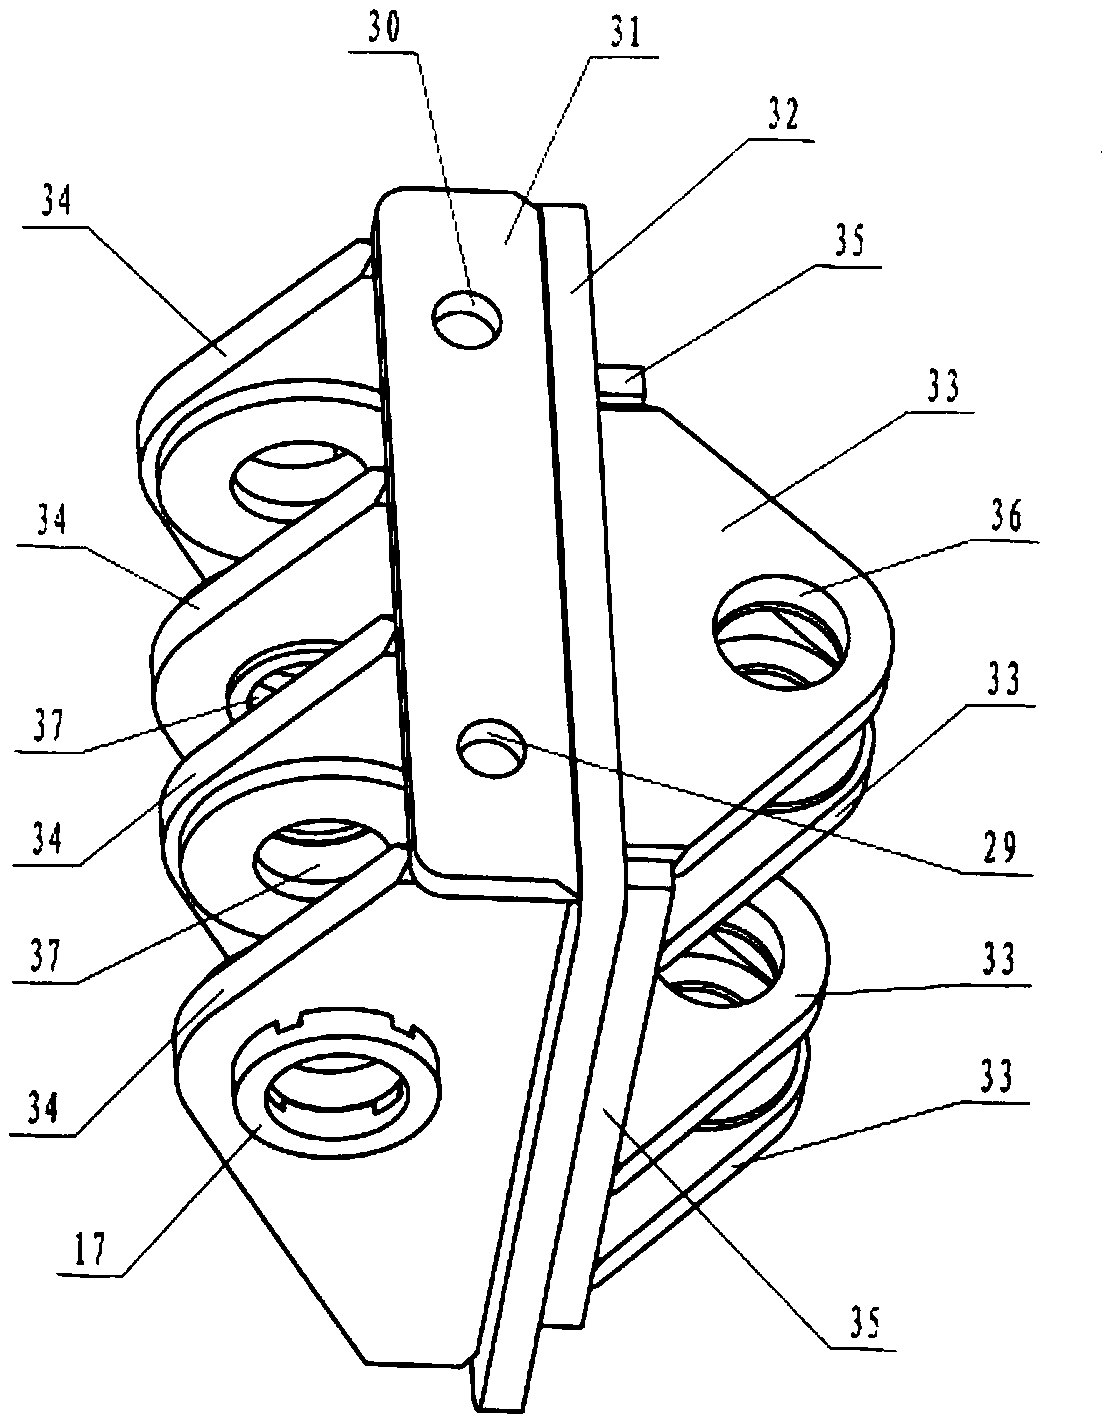 Articulated device and heavy-duty bracket transporter